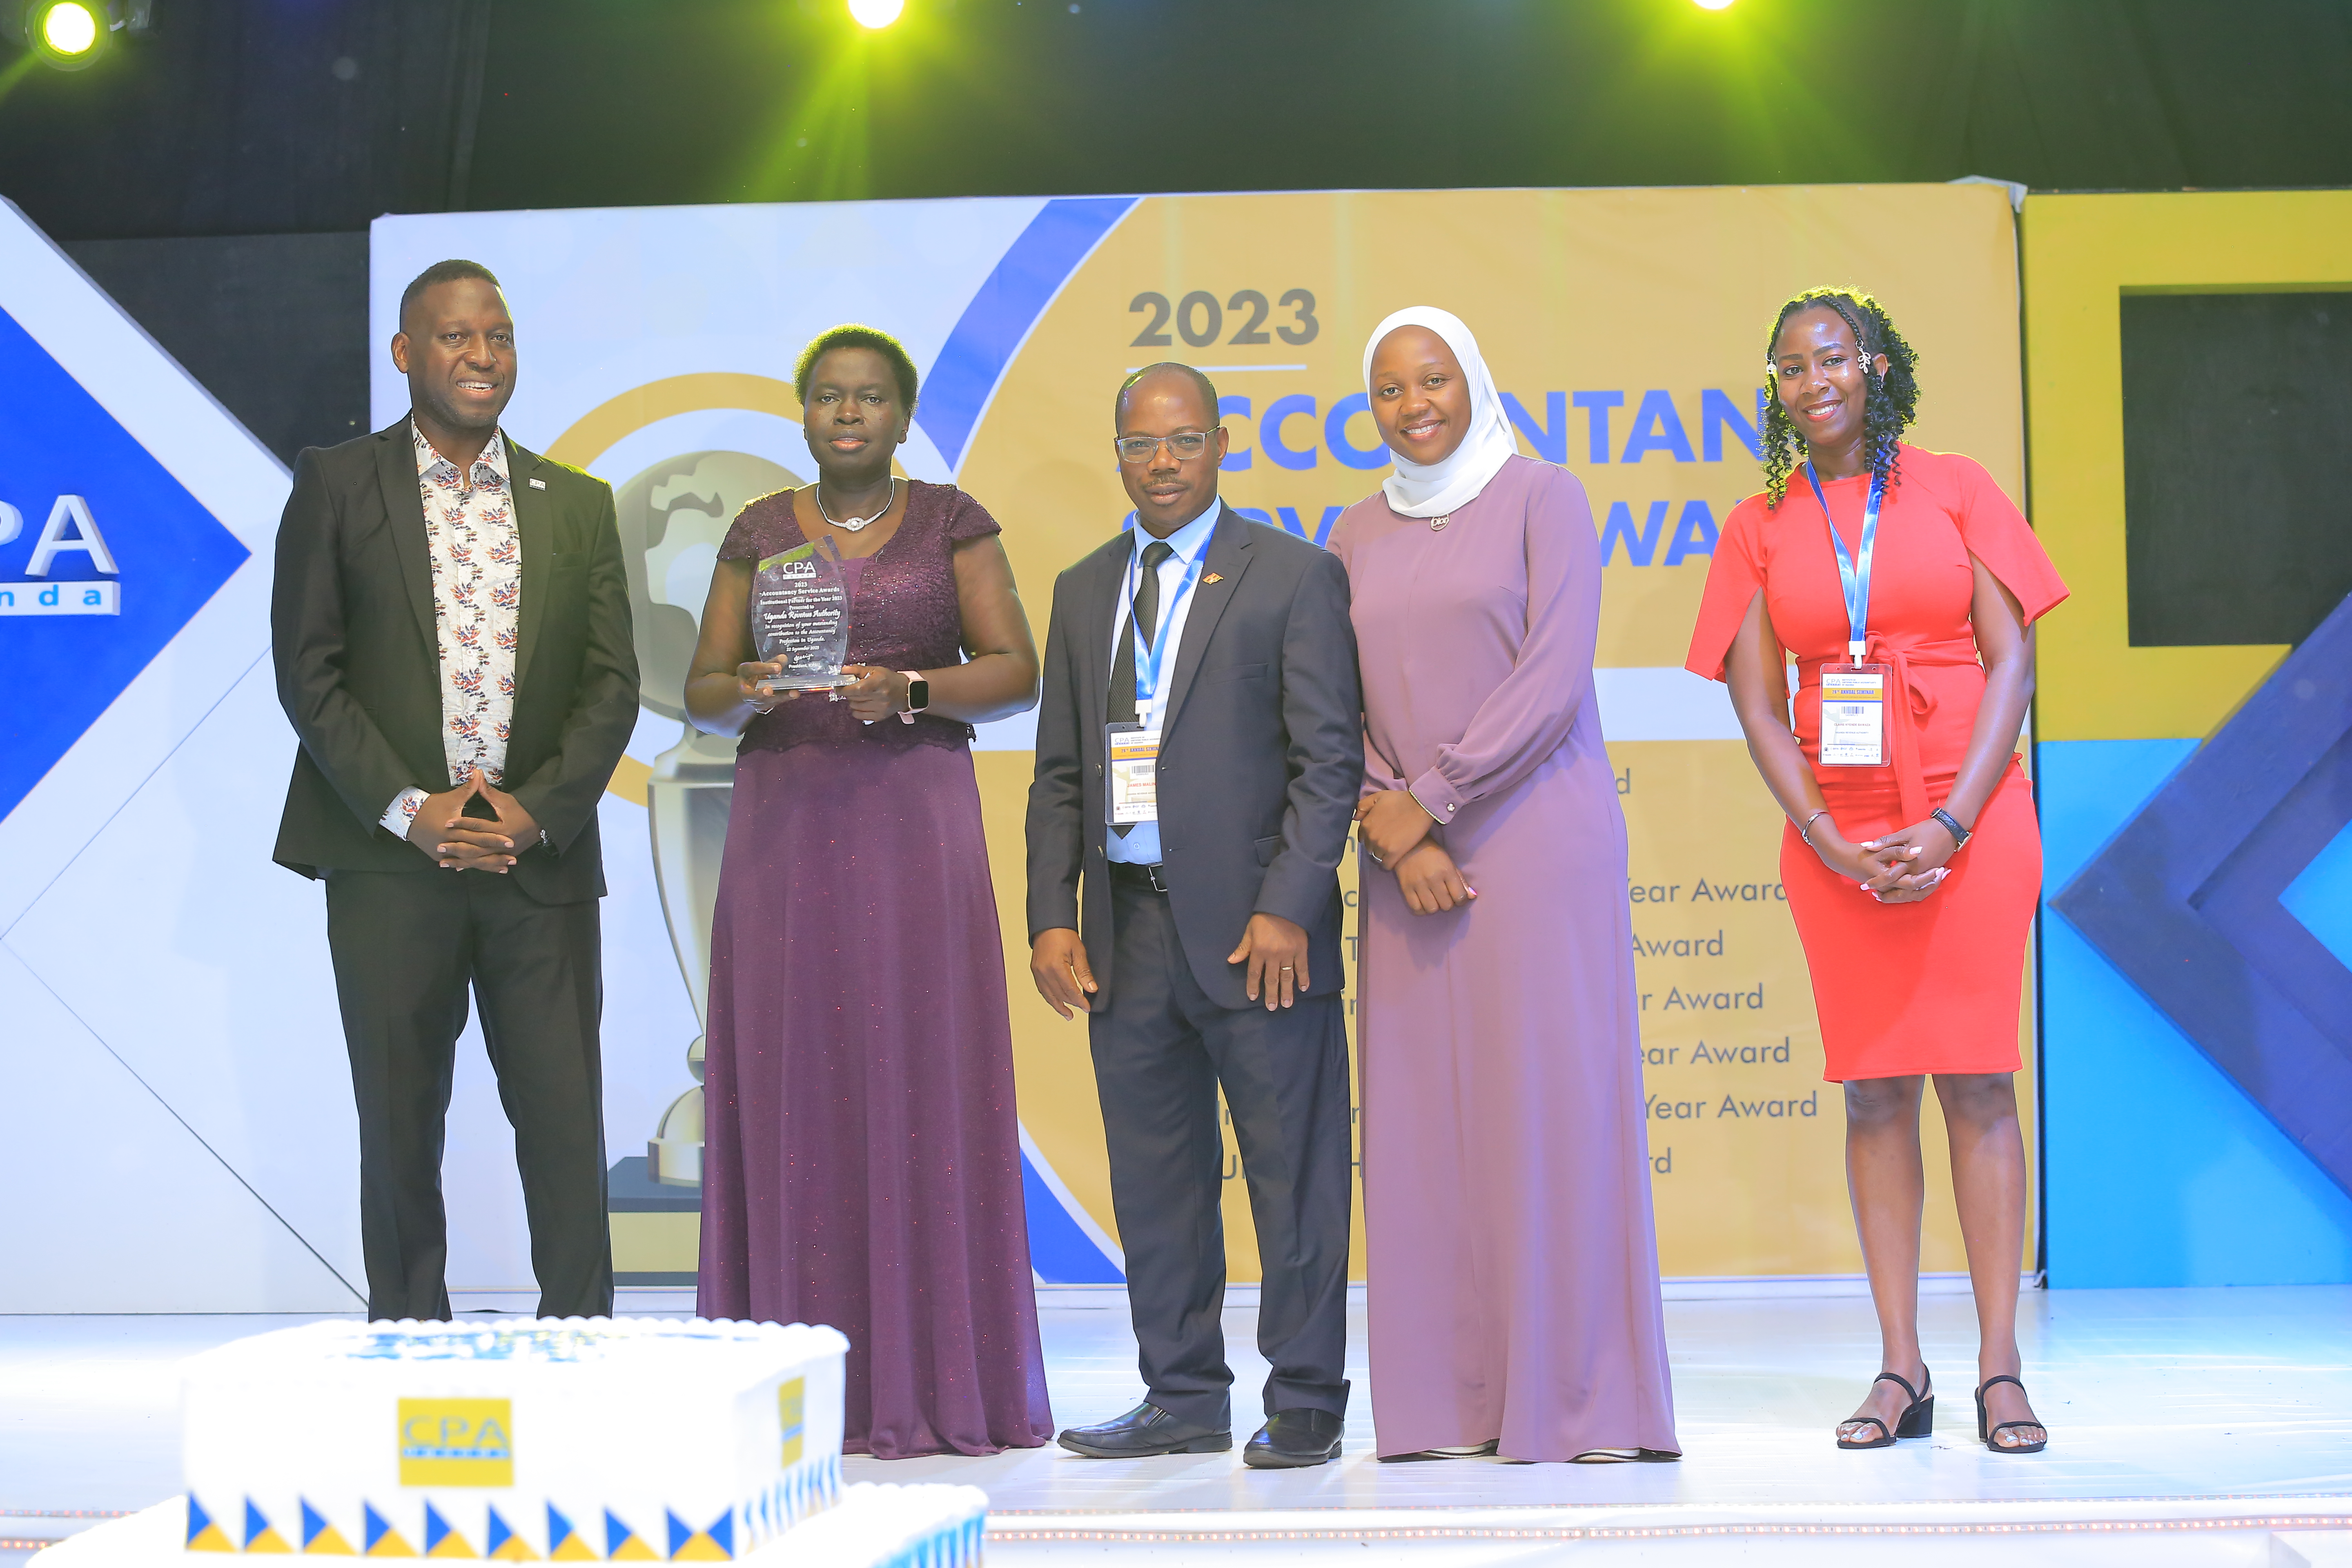 Some staff of URA receiving the Award. Left is ICPAU Council member CPA David Timothy Ediomu.